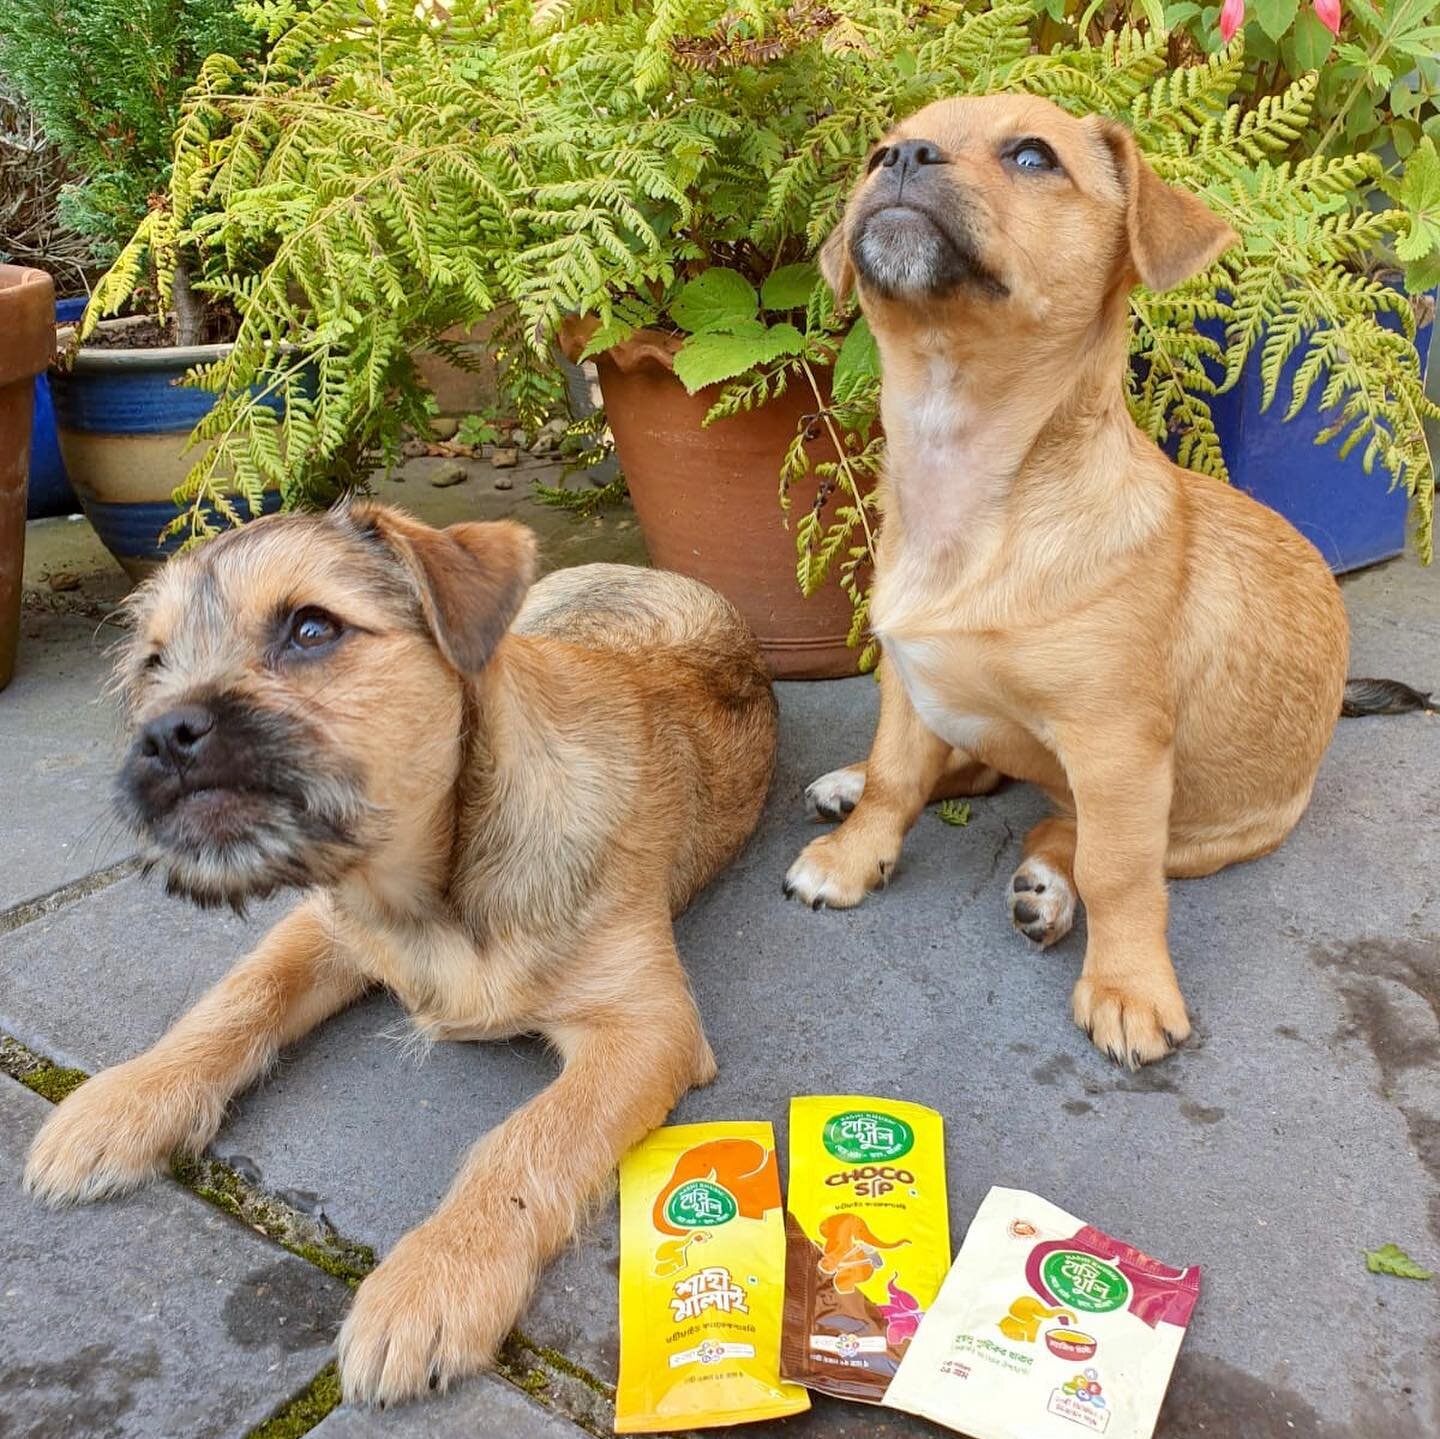 Even our furry friends are getting onboard with our campaign - make sure you do too! 🐶 

Only 2 days left to get your hands on some of our delicious lentil butter, whilst helping those less fortunate at the same time!

Don&rsquo;t wait around - get 